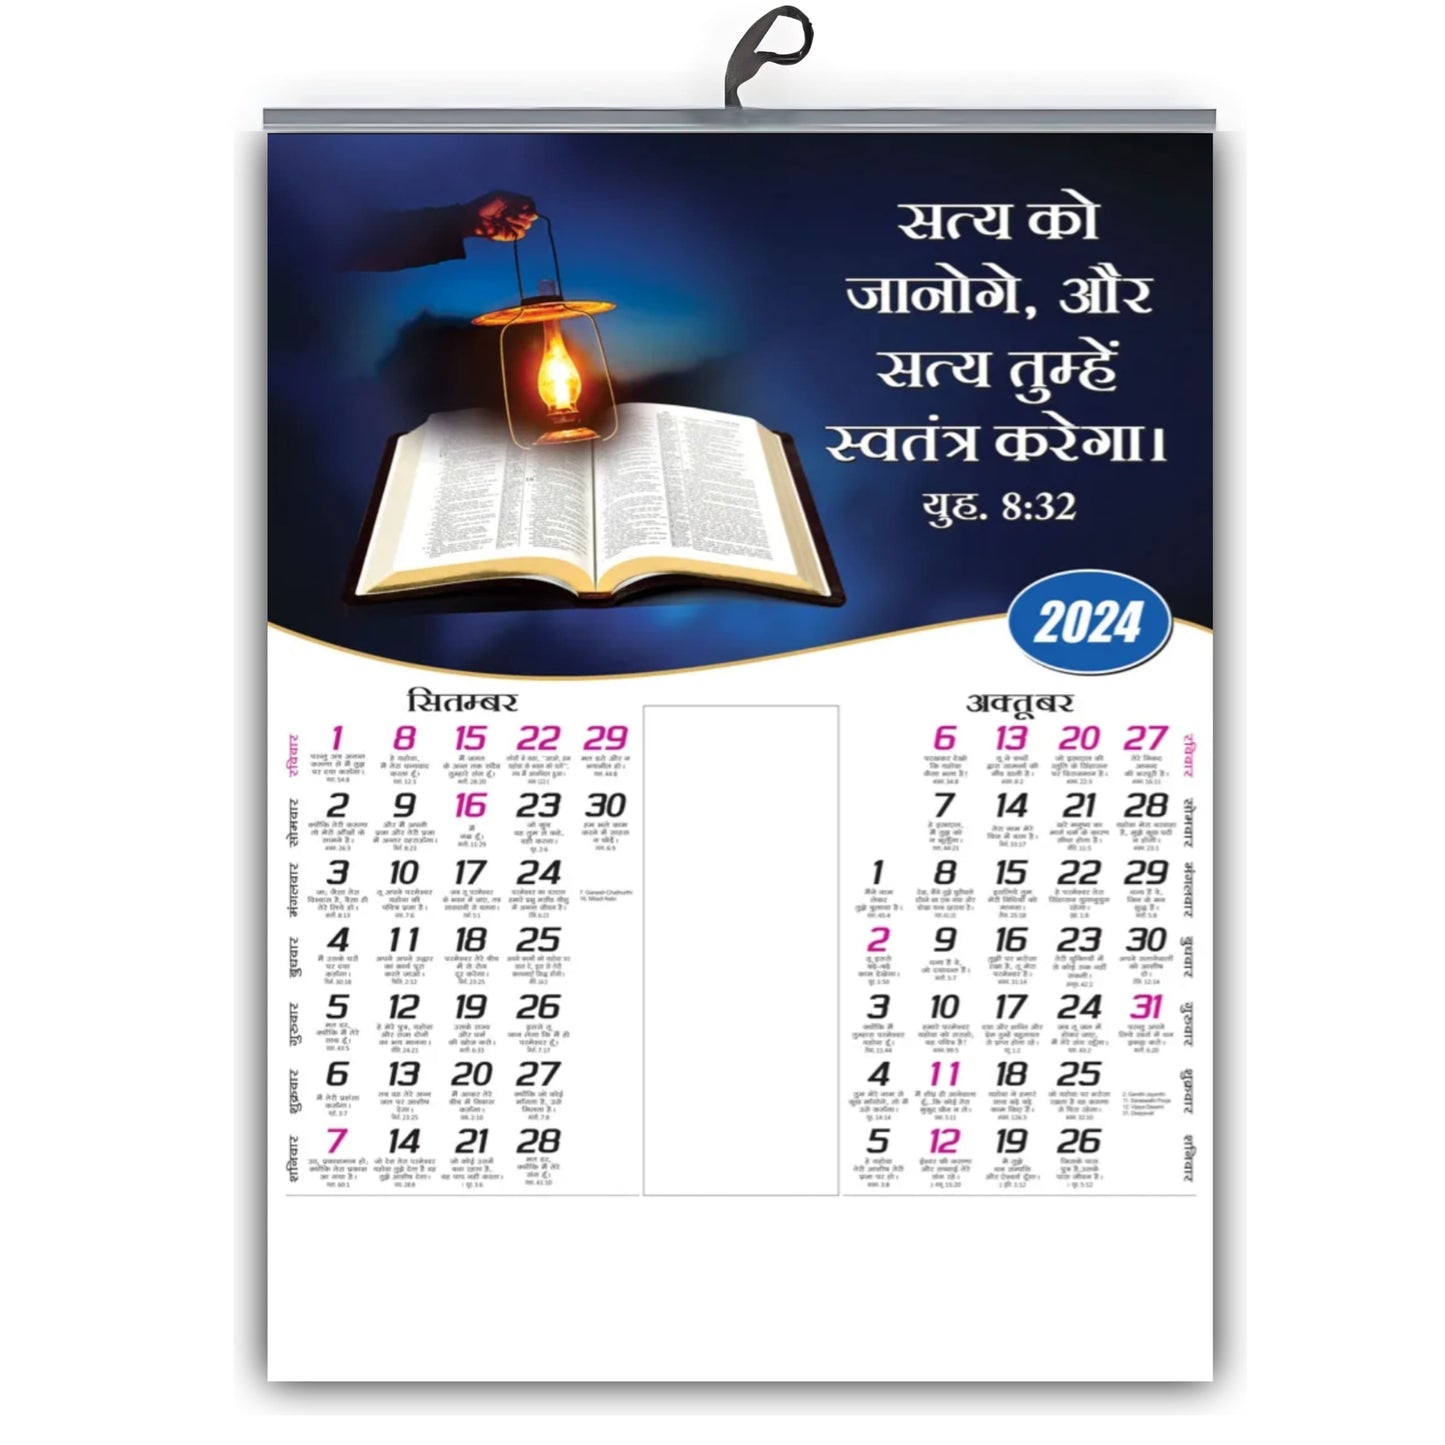 2024 Bible Verse Hindi Wall Calendar - Beautiful Flowers & Baby with Bible Promise Words